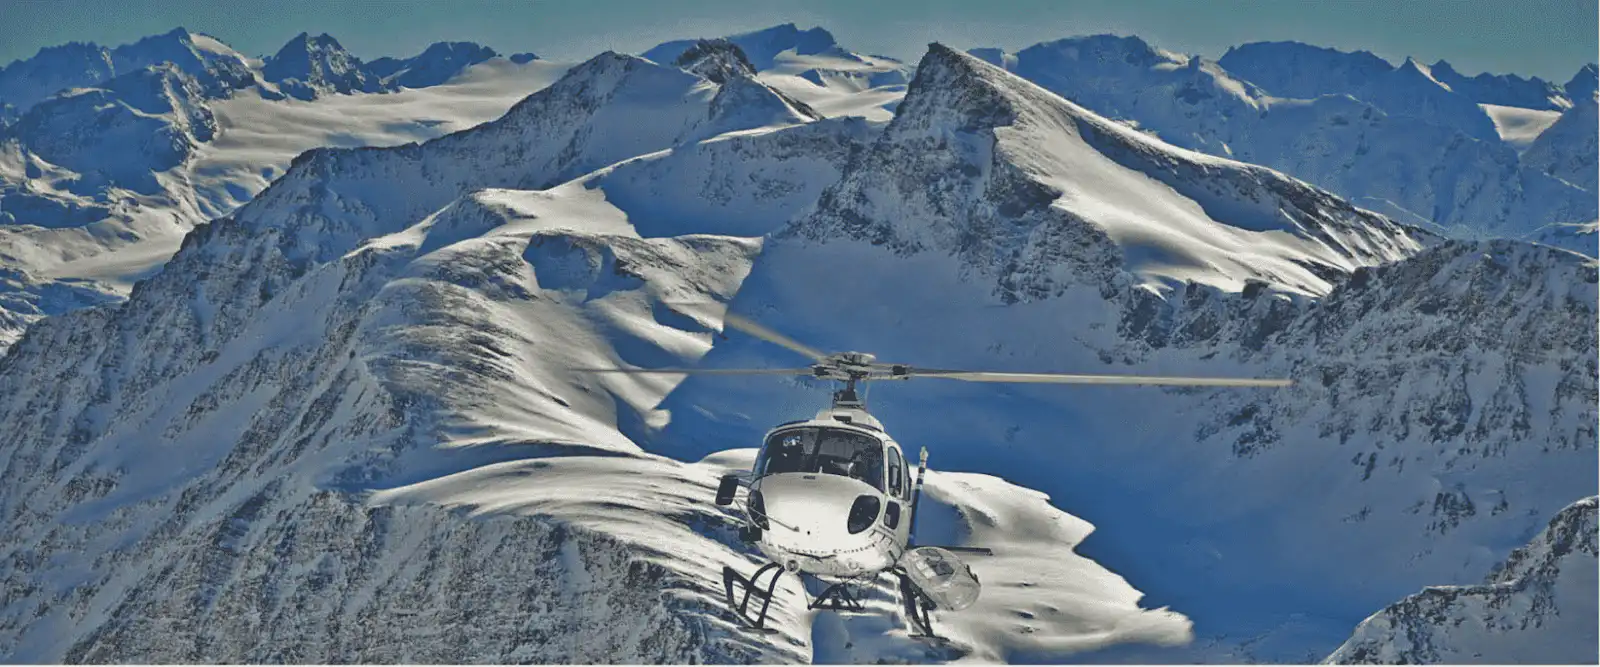 Heliskiing in the Aosta Valley: What are the Best Spots? post image